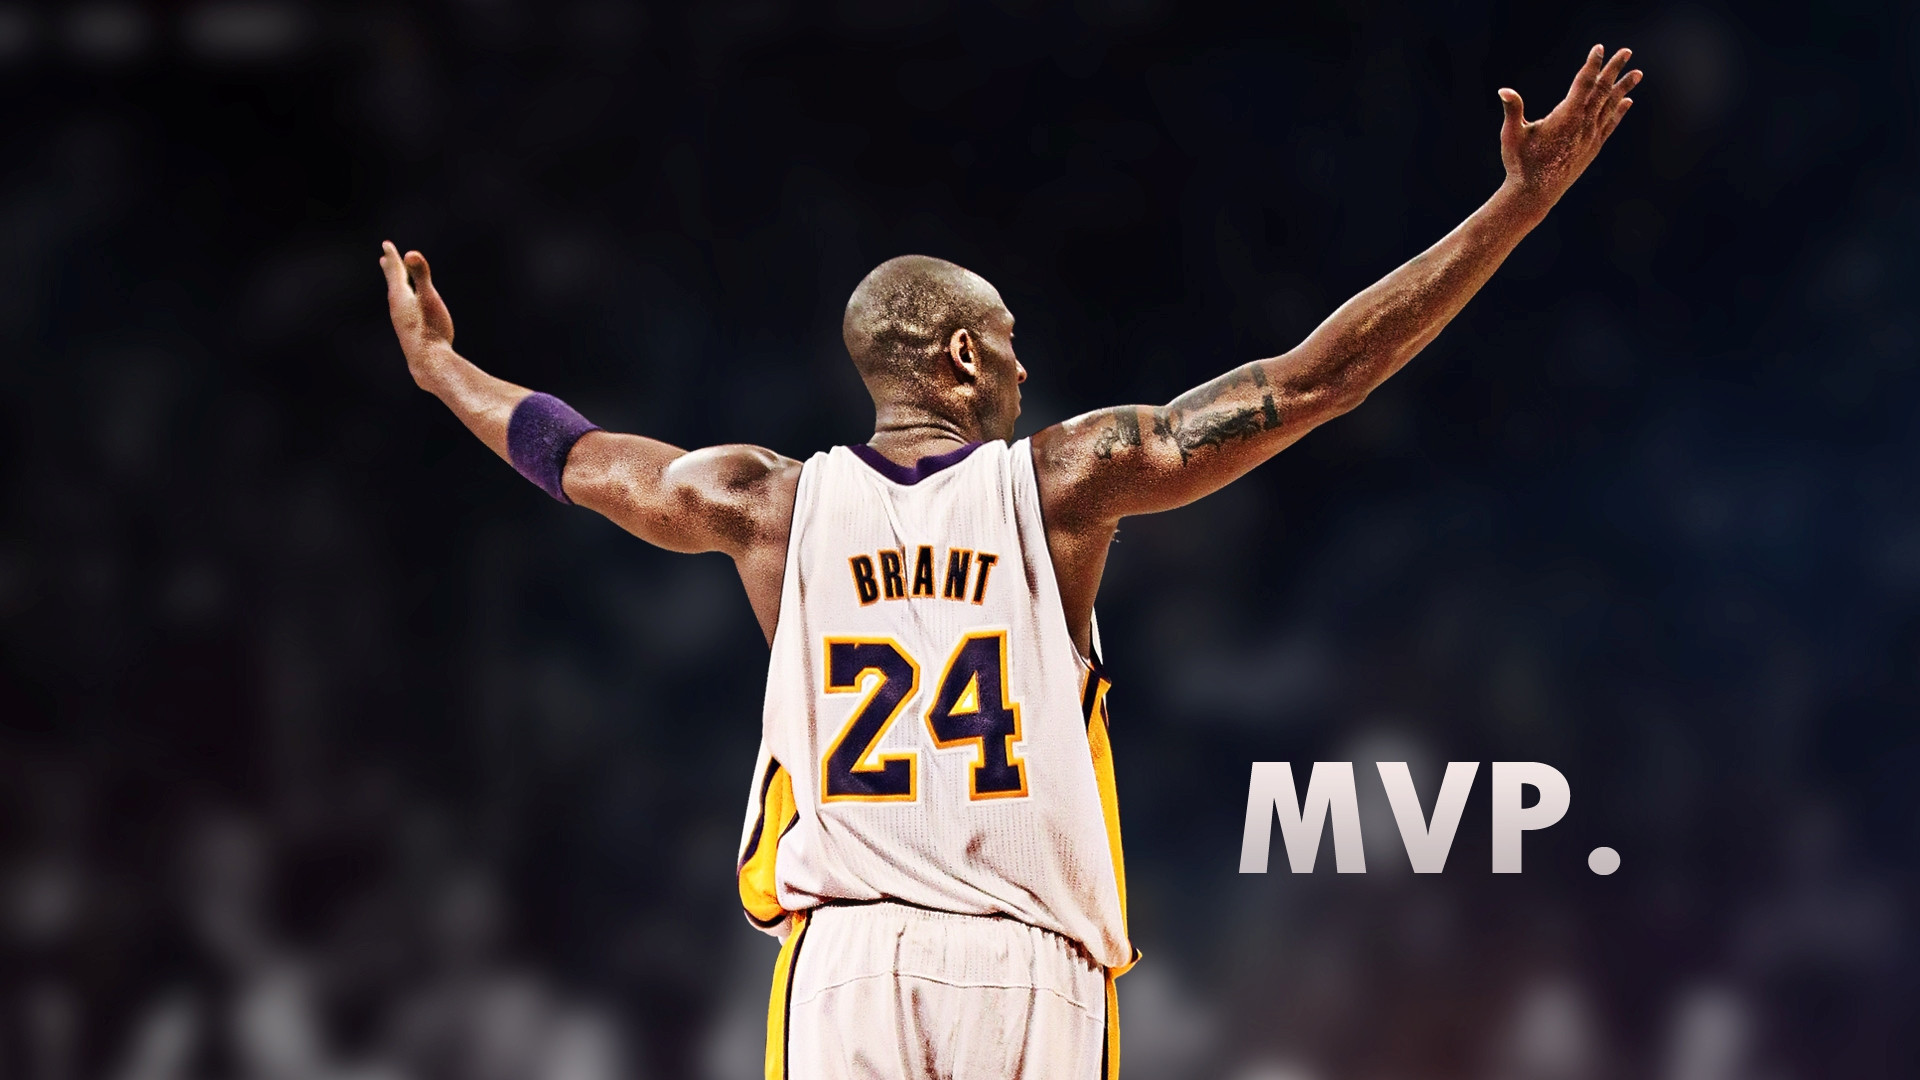 1920x1080 Kobe Bryant Wallpapers High Resolution and Quality DownloadKobe Bryant